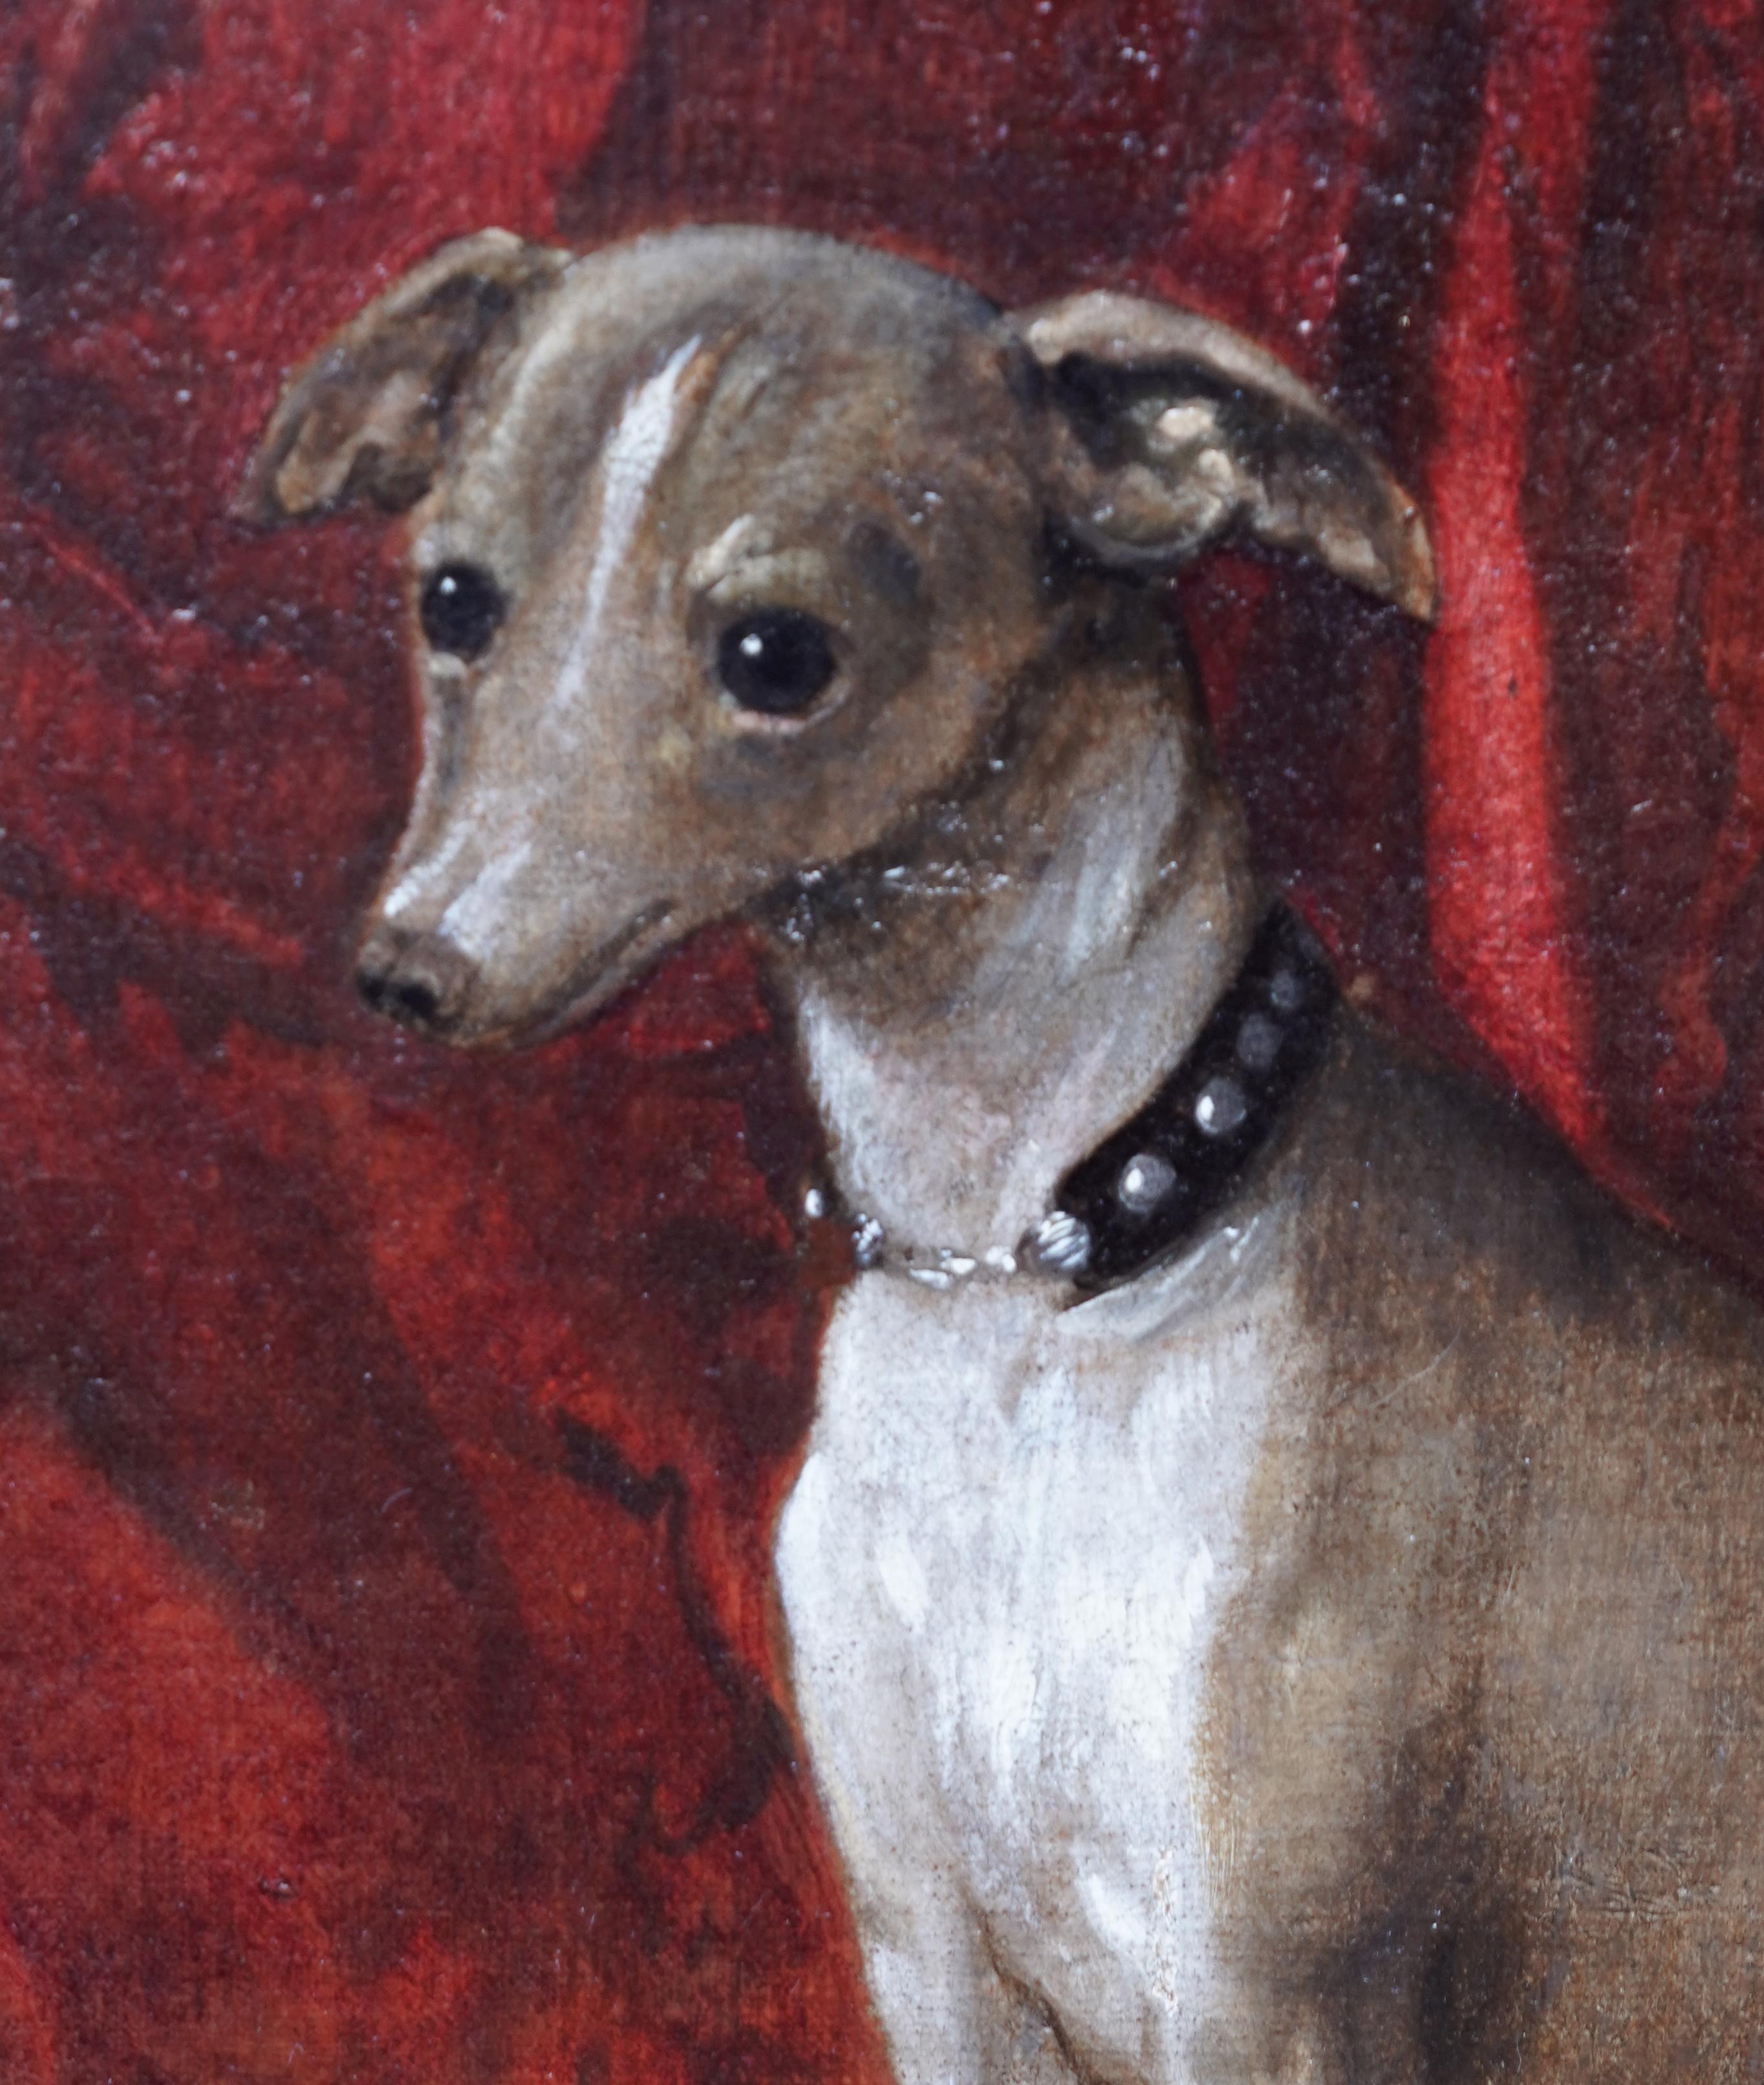 This stunning Old Master 17th century oil portrait painting is attributed to Francesco Fieravino, an artist famous in his day for still lifes and carpets. This painting which dates to circa 1650 is a stunning depiction of an Italian Greyhound on the